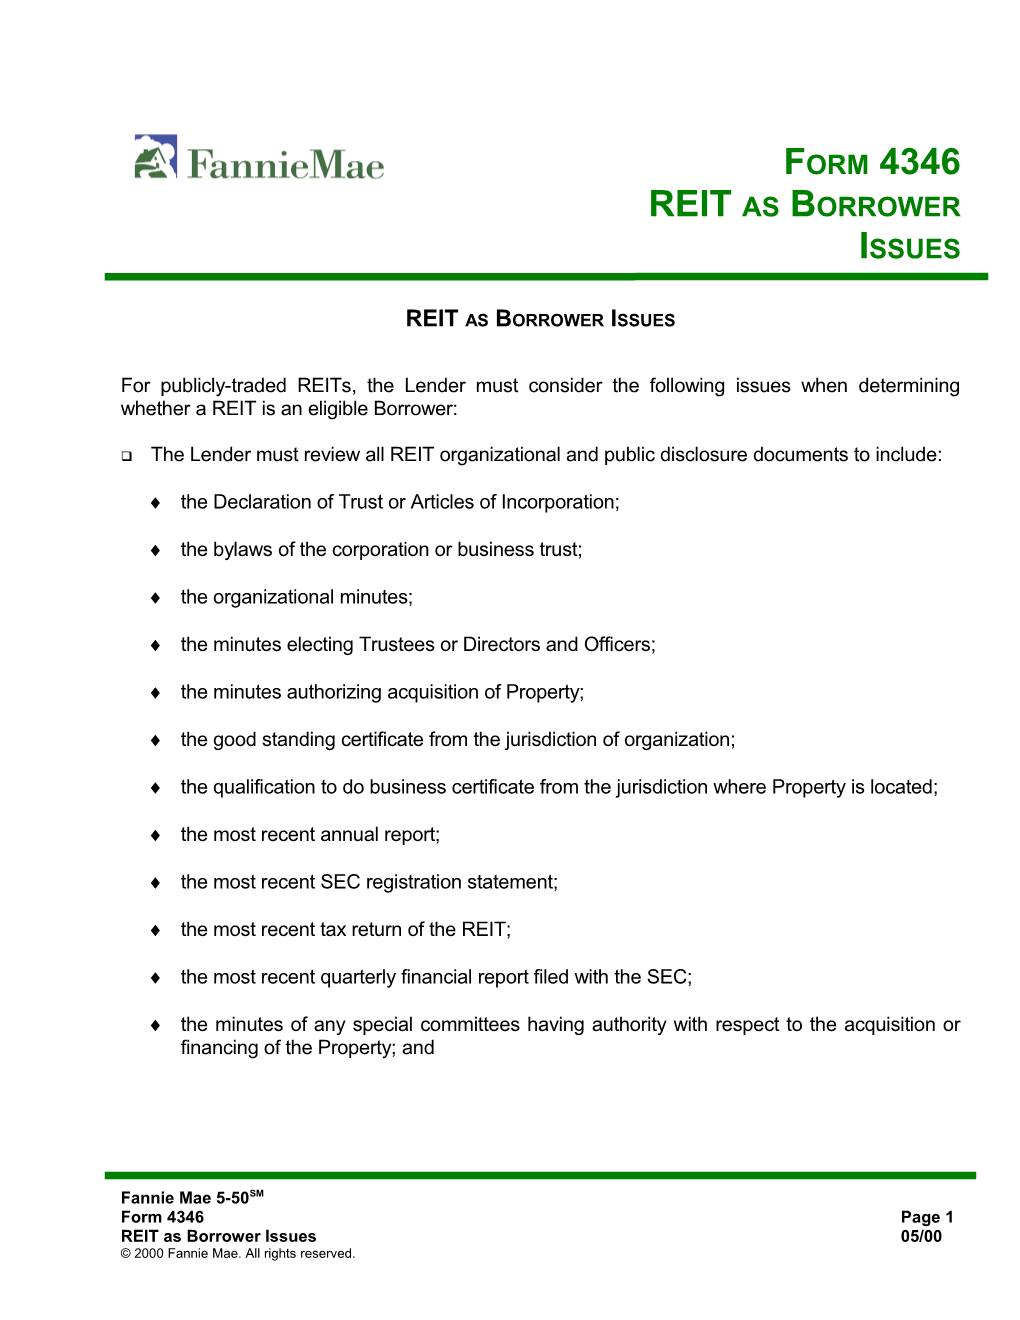 Publicly Traded Reits Are Acceptable Borrowers in Accordance with the Criteria Provided